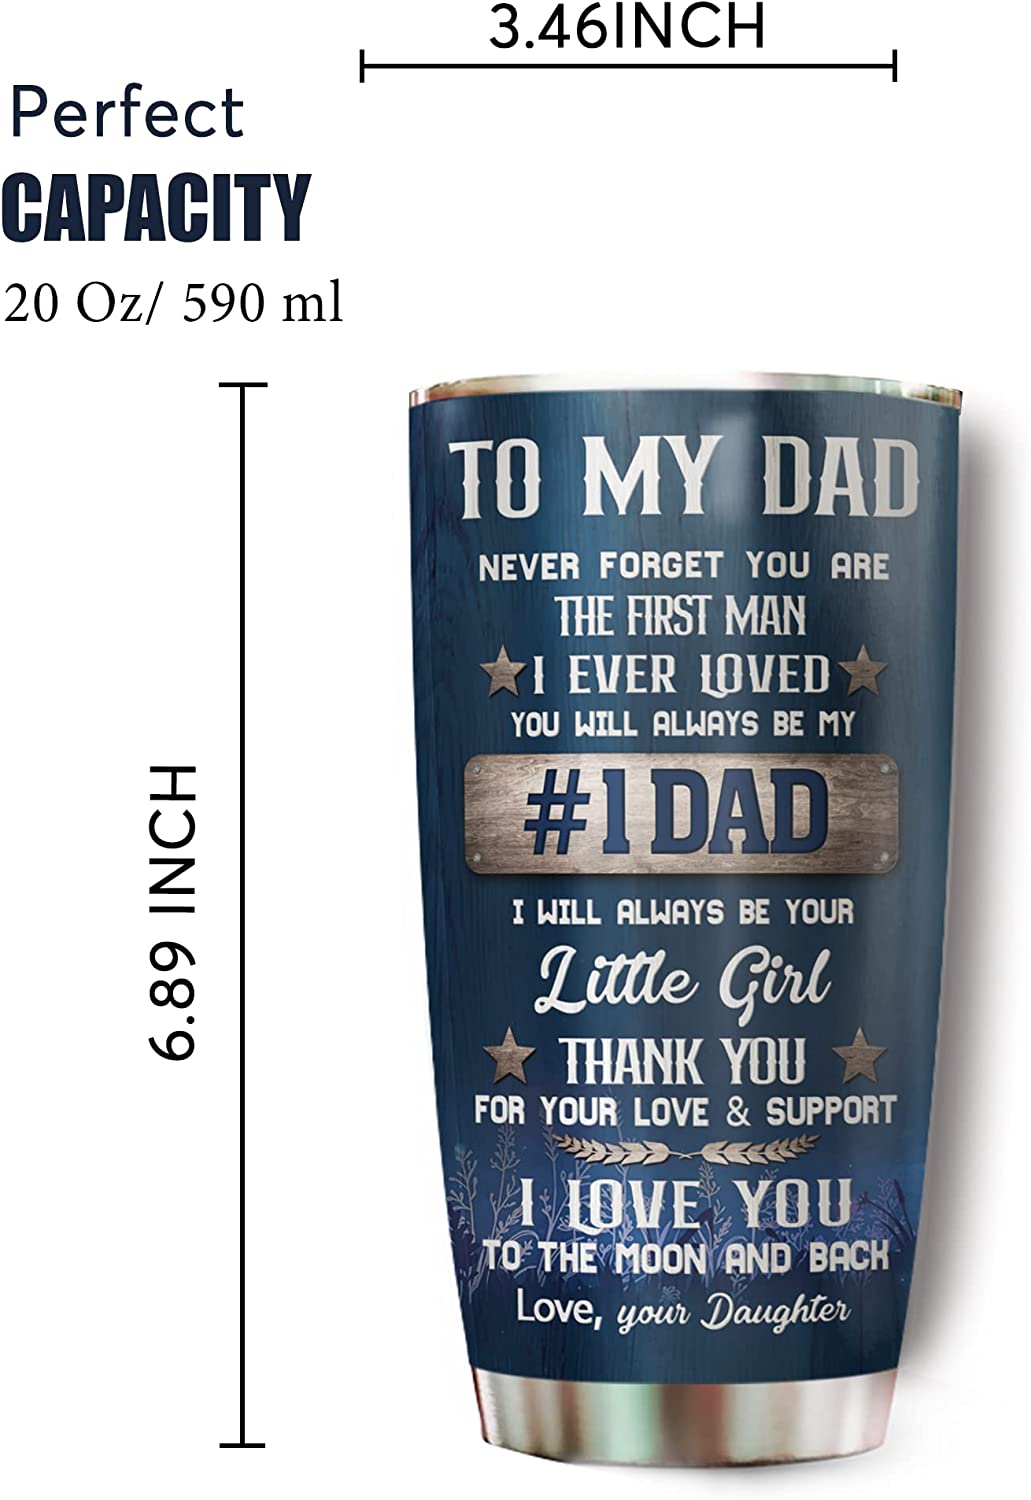 Amazon.com : Father's Day Gifts, Gifts for Dad, Dad Birthday Gifts Wallet  Card, Engraved Rock with Words, BEST DAD EVER Wooden Gift Box, Rare Unique  Gift for Your DAD, Your HERO. :